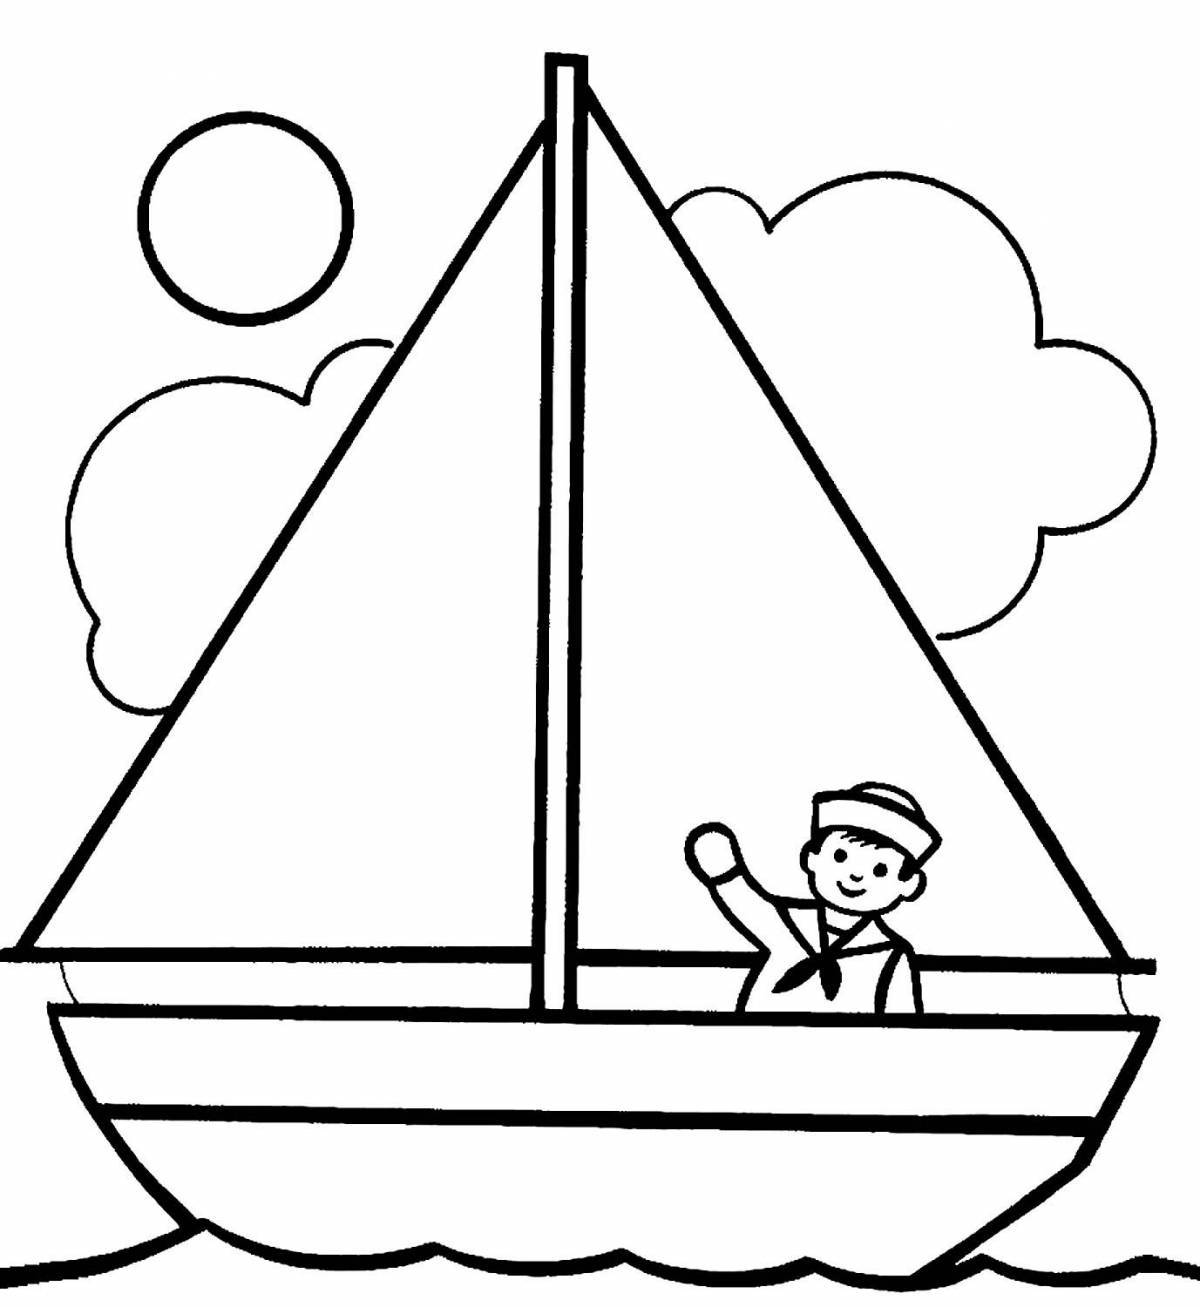 Coloring page gorgeous boat